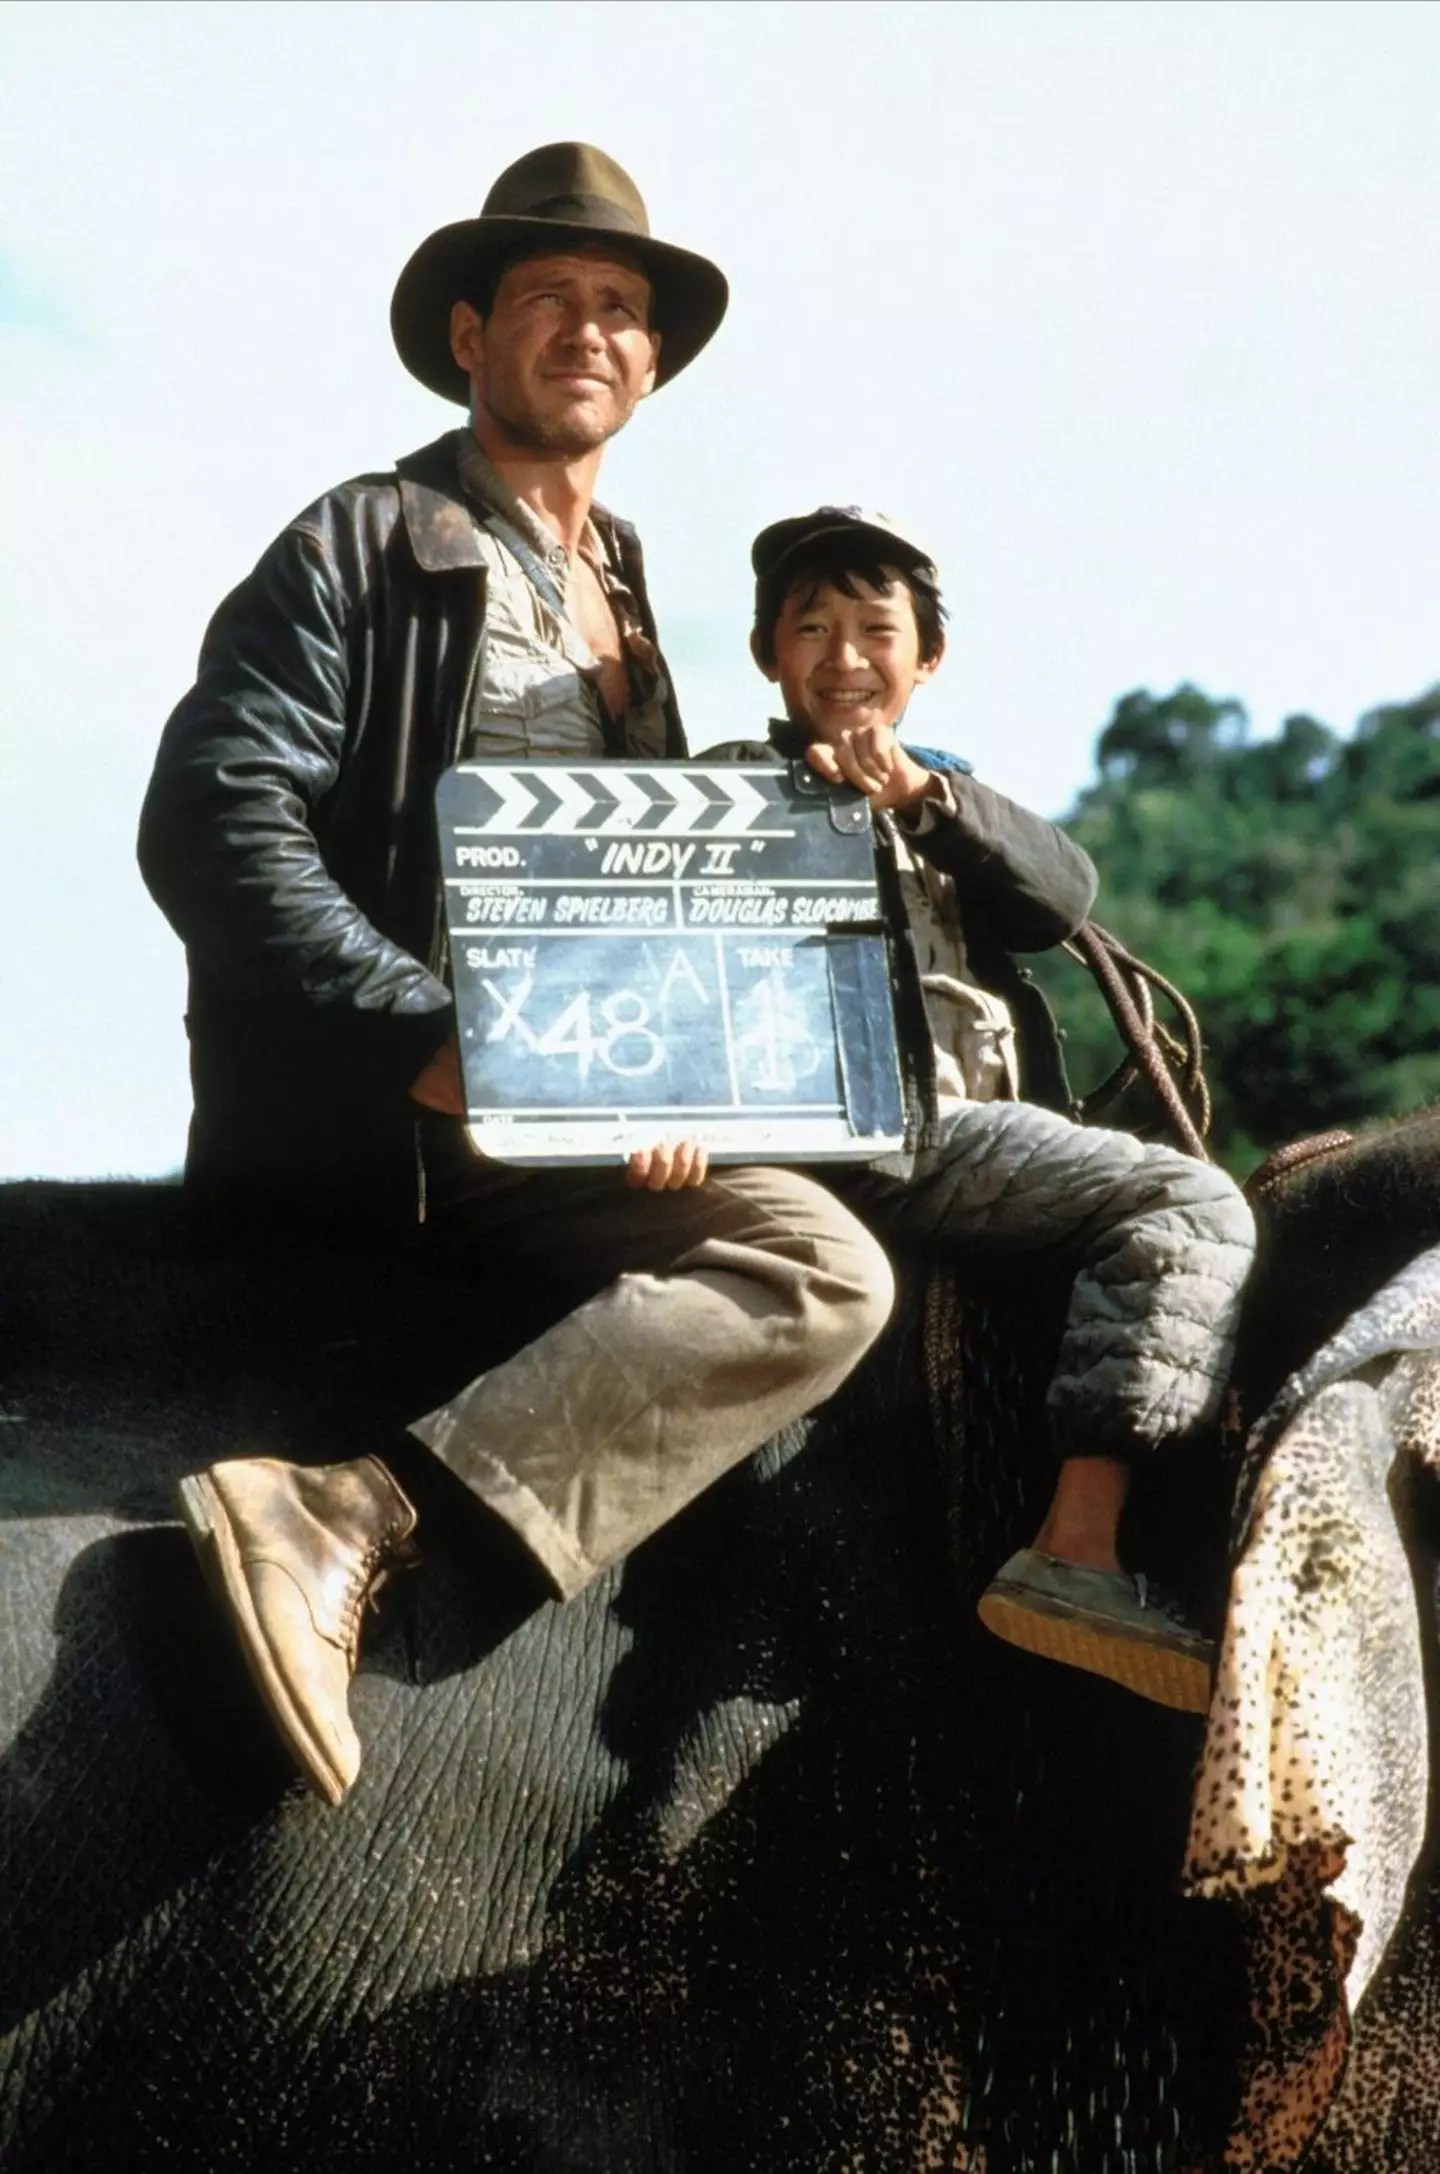 Harrison Ford and Ke Huy Quan last worked together on Indiana Jones and the Temple of Doom.